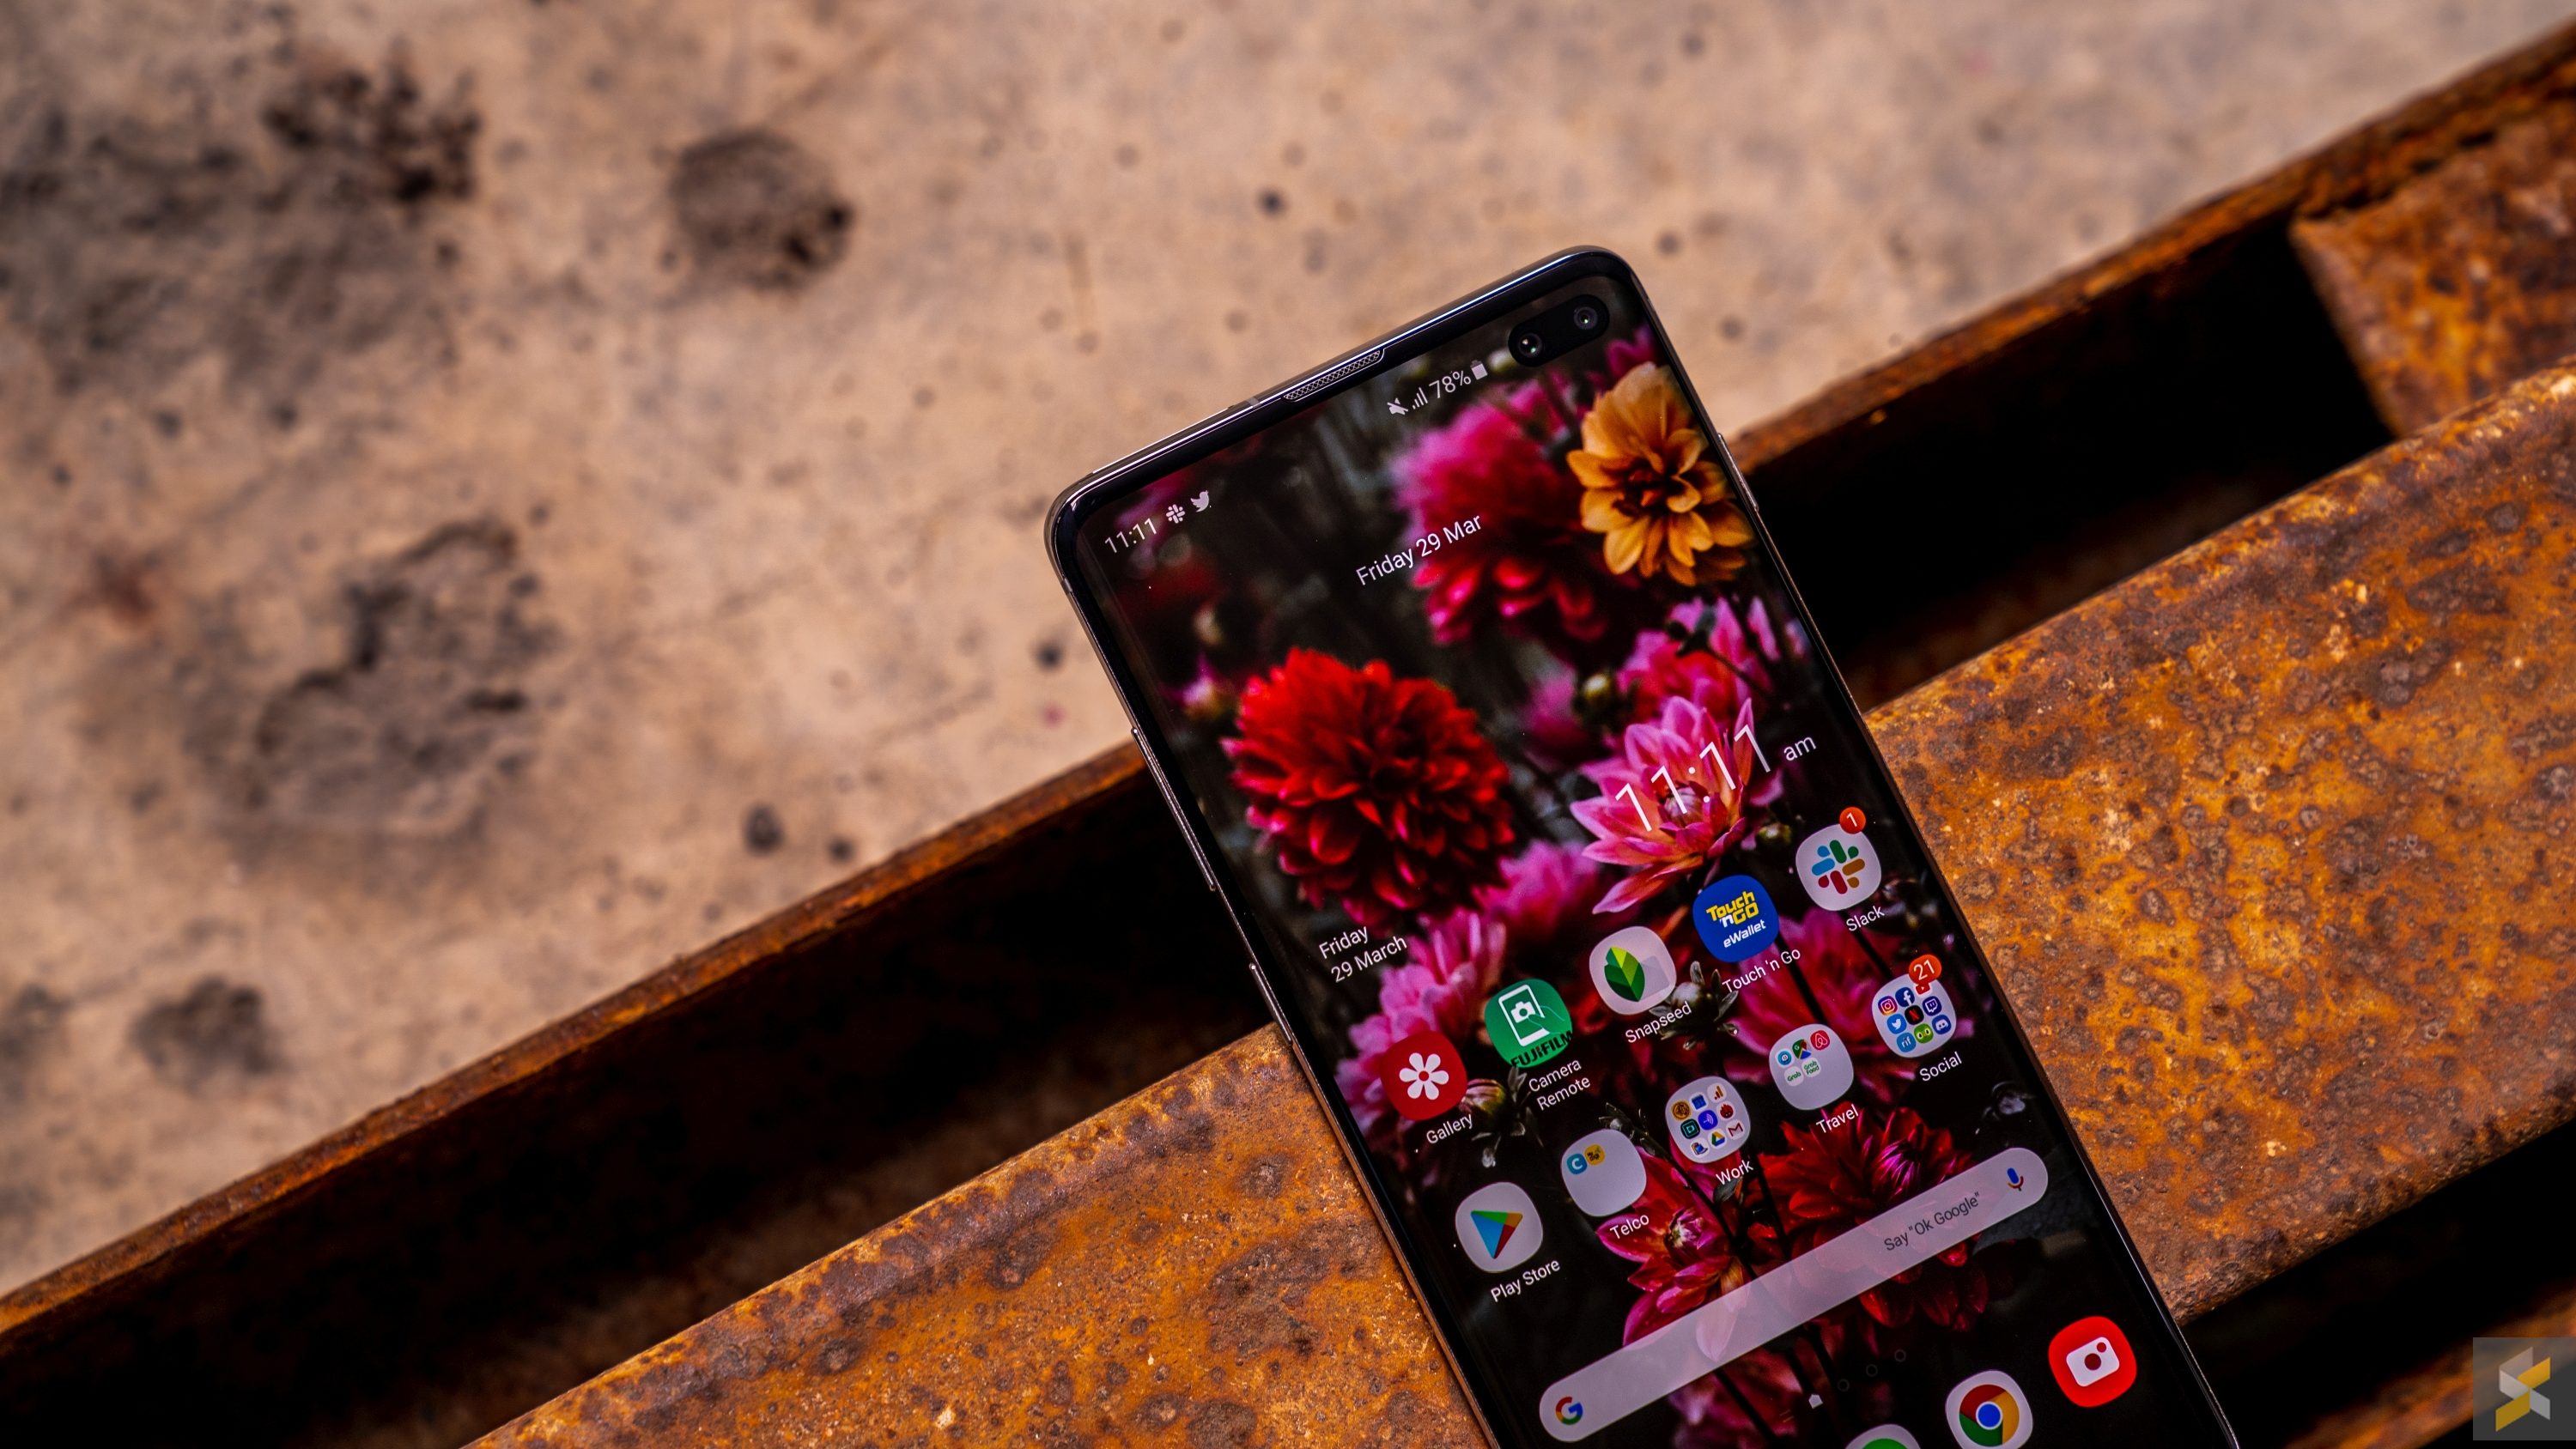 Samsung Galaxy S10 S10+ Plus Review